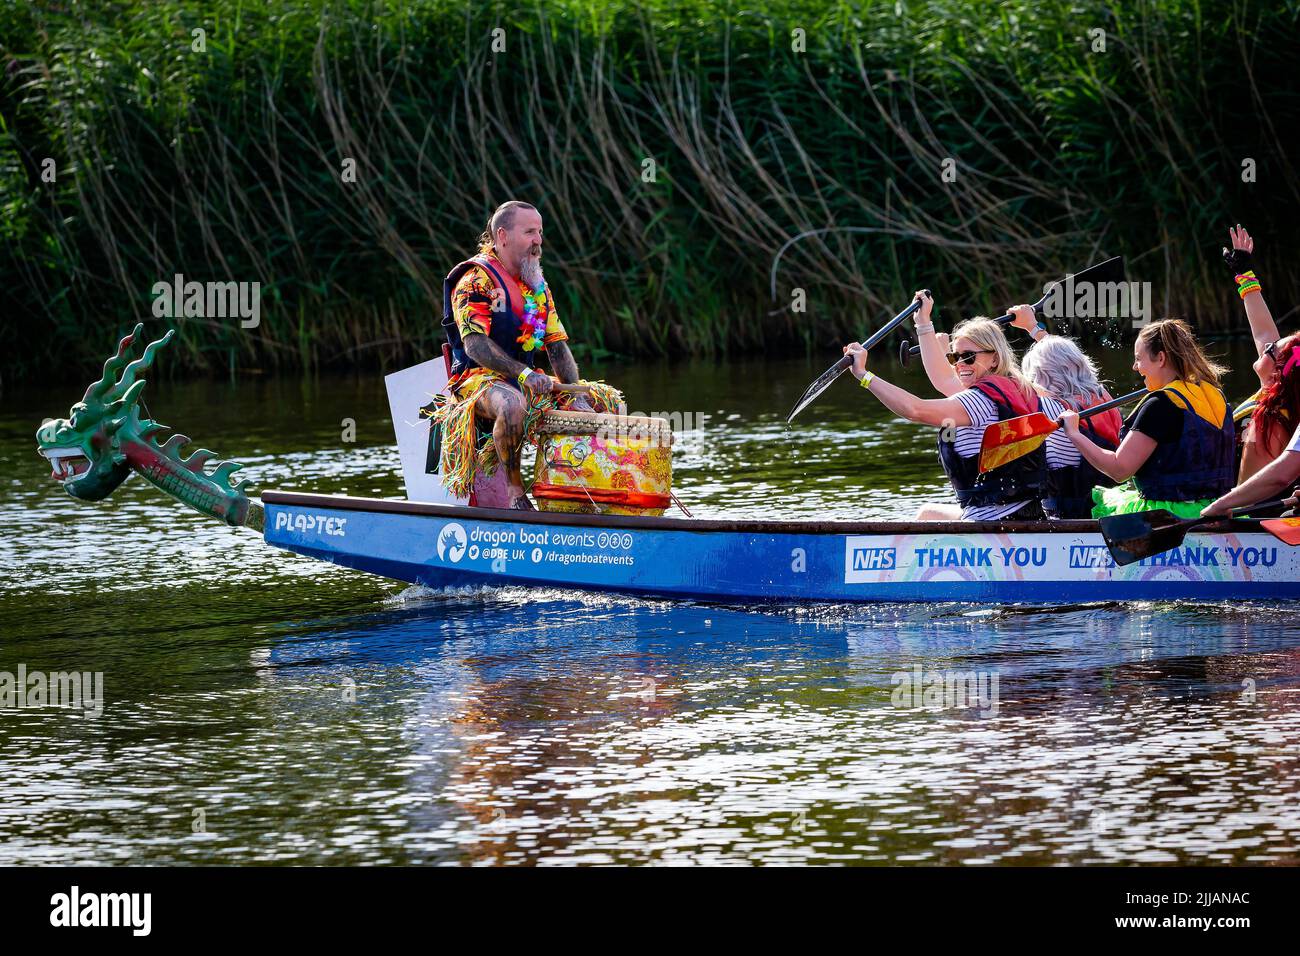 Man in Hawaiian shirt and grass skirt banging the drum in a Dragon Boat race Stock Photo